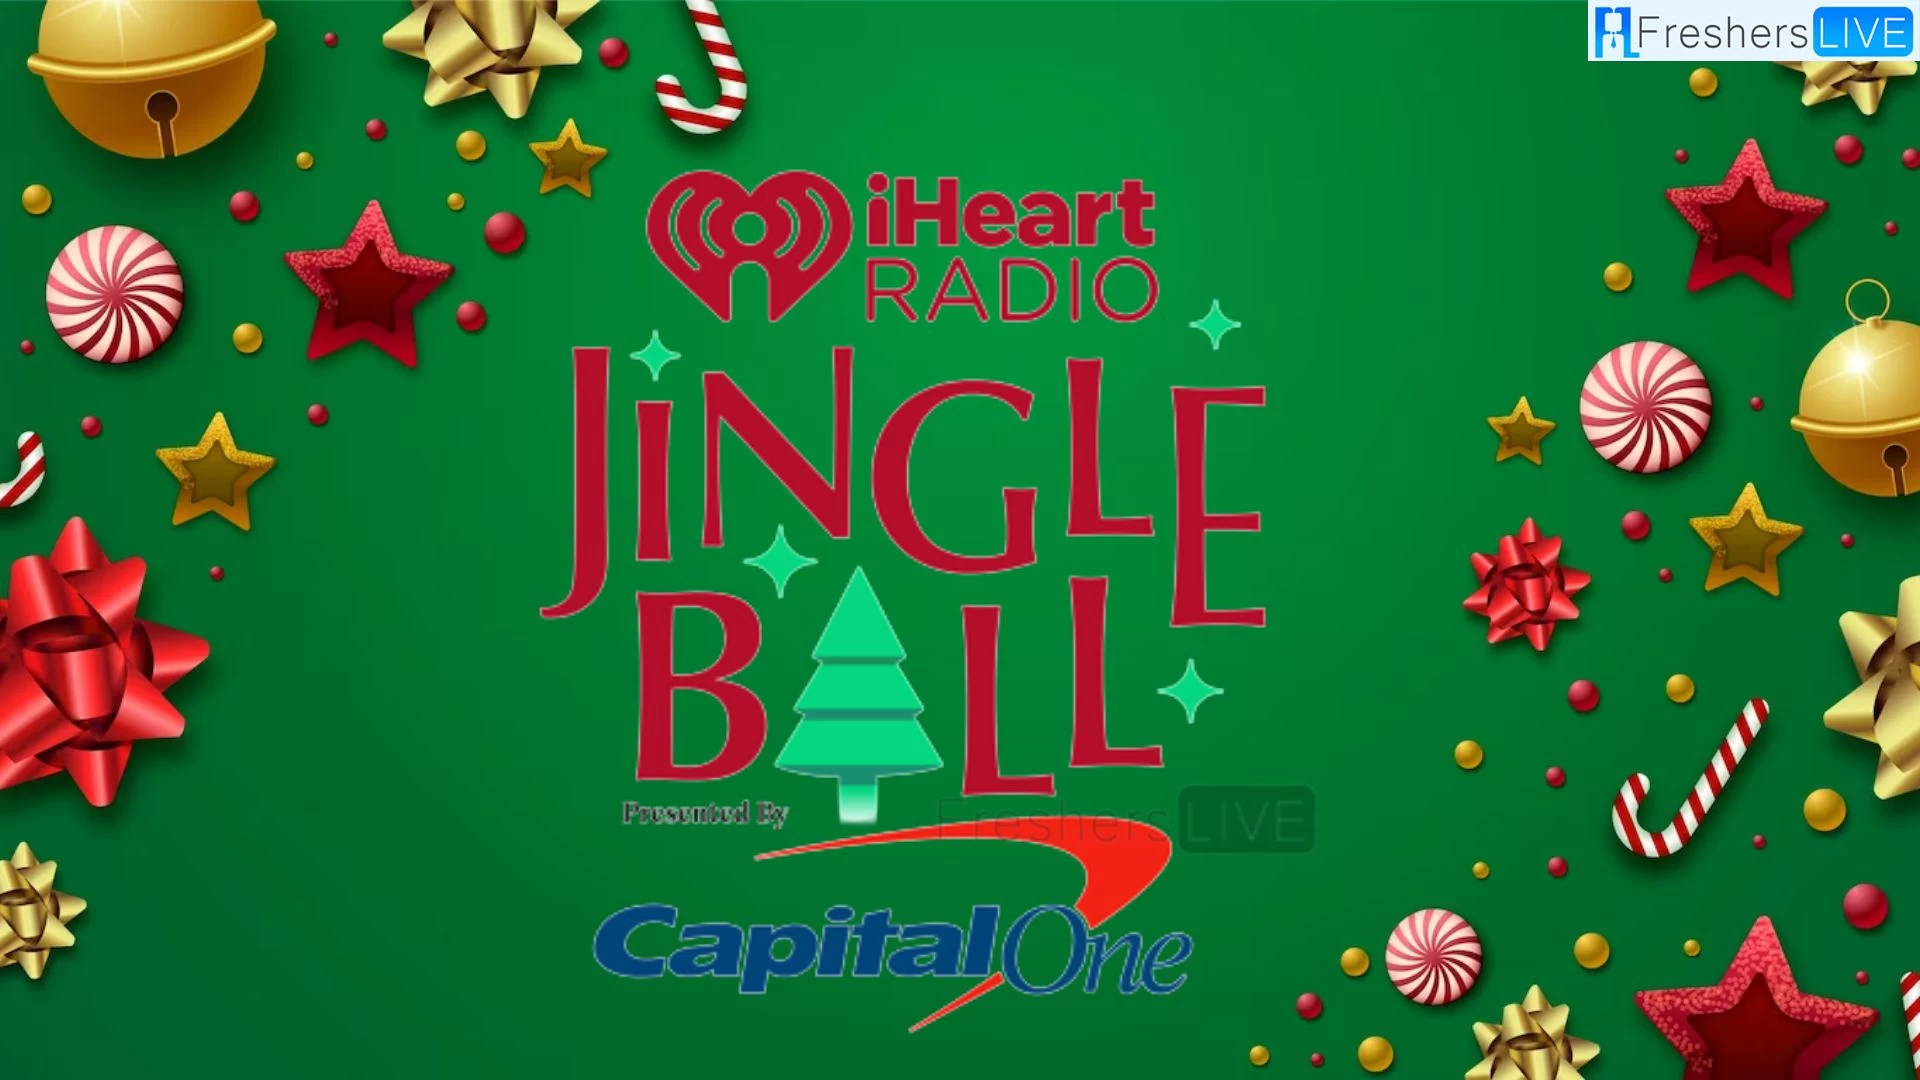 How to Get Tickets to Jingle Ball 2023?